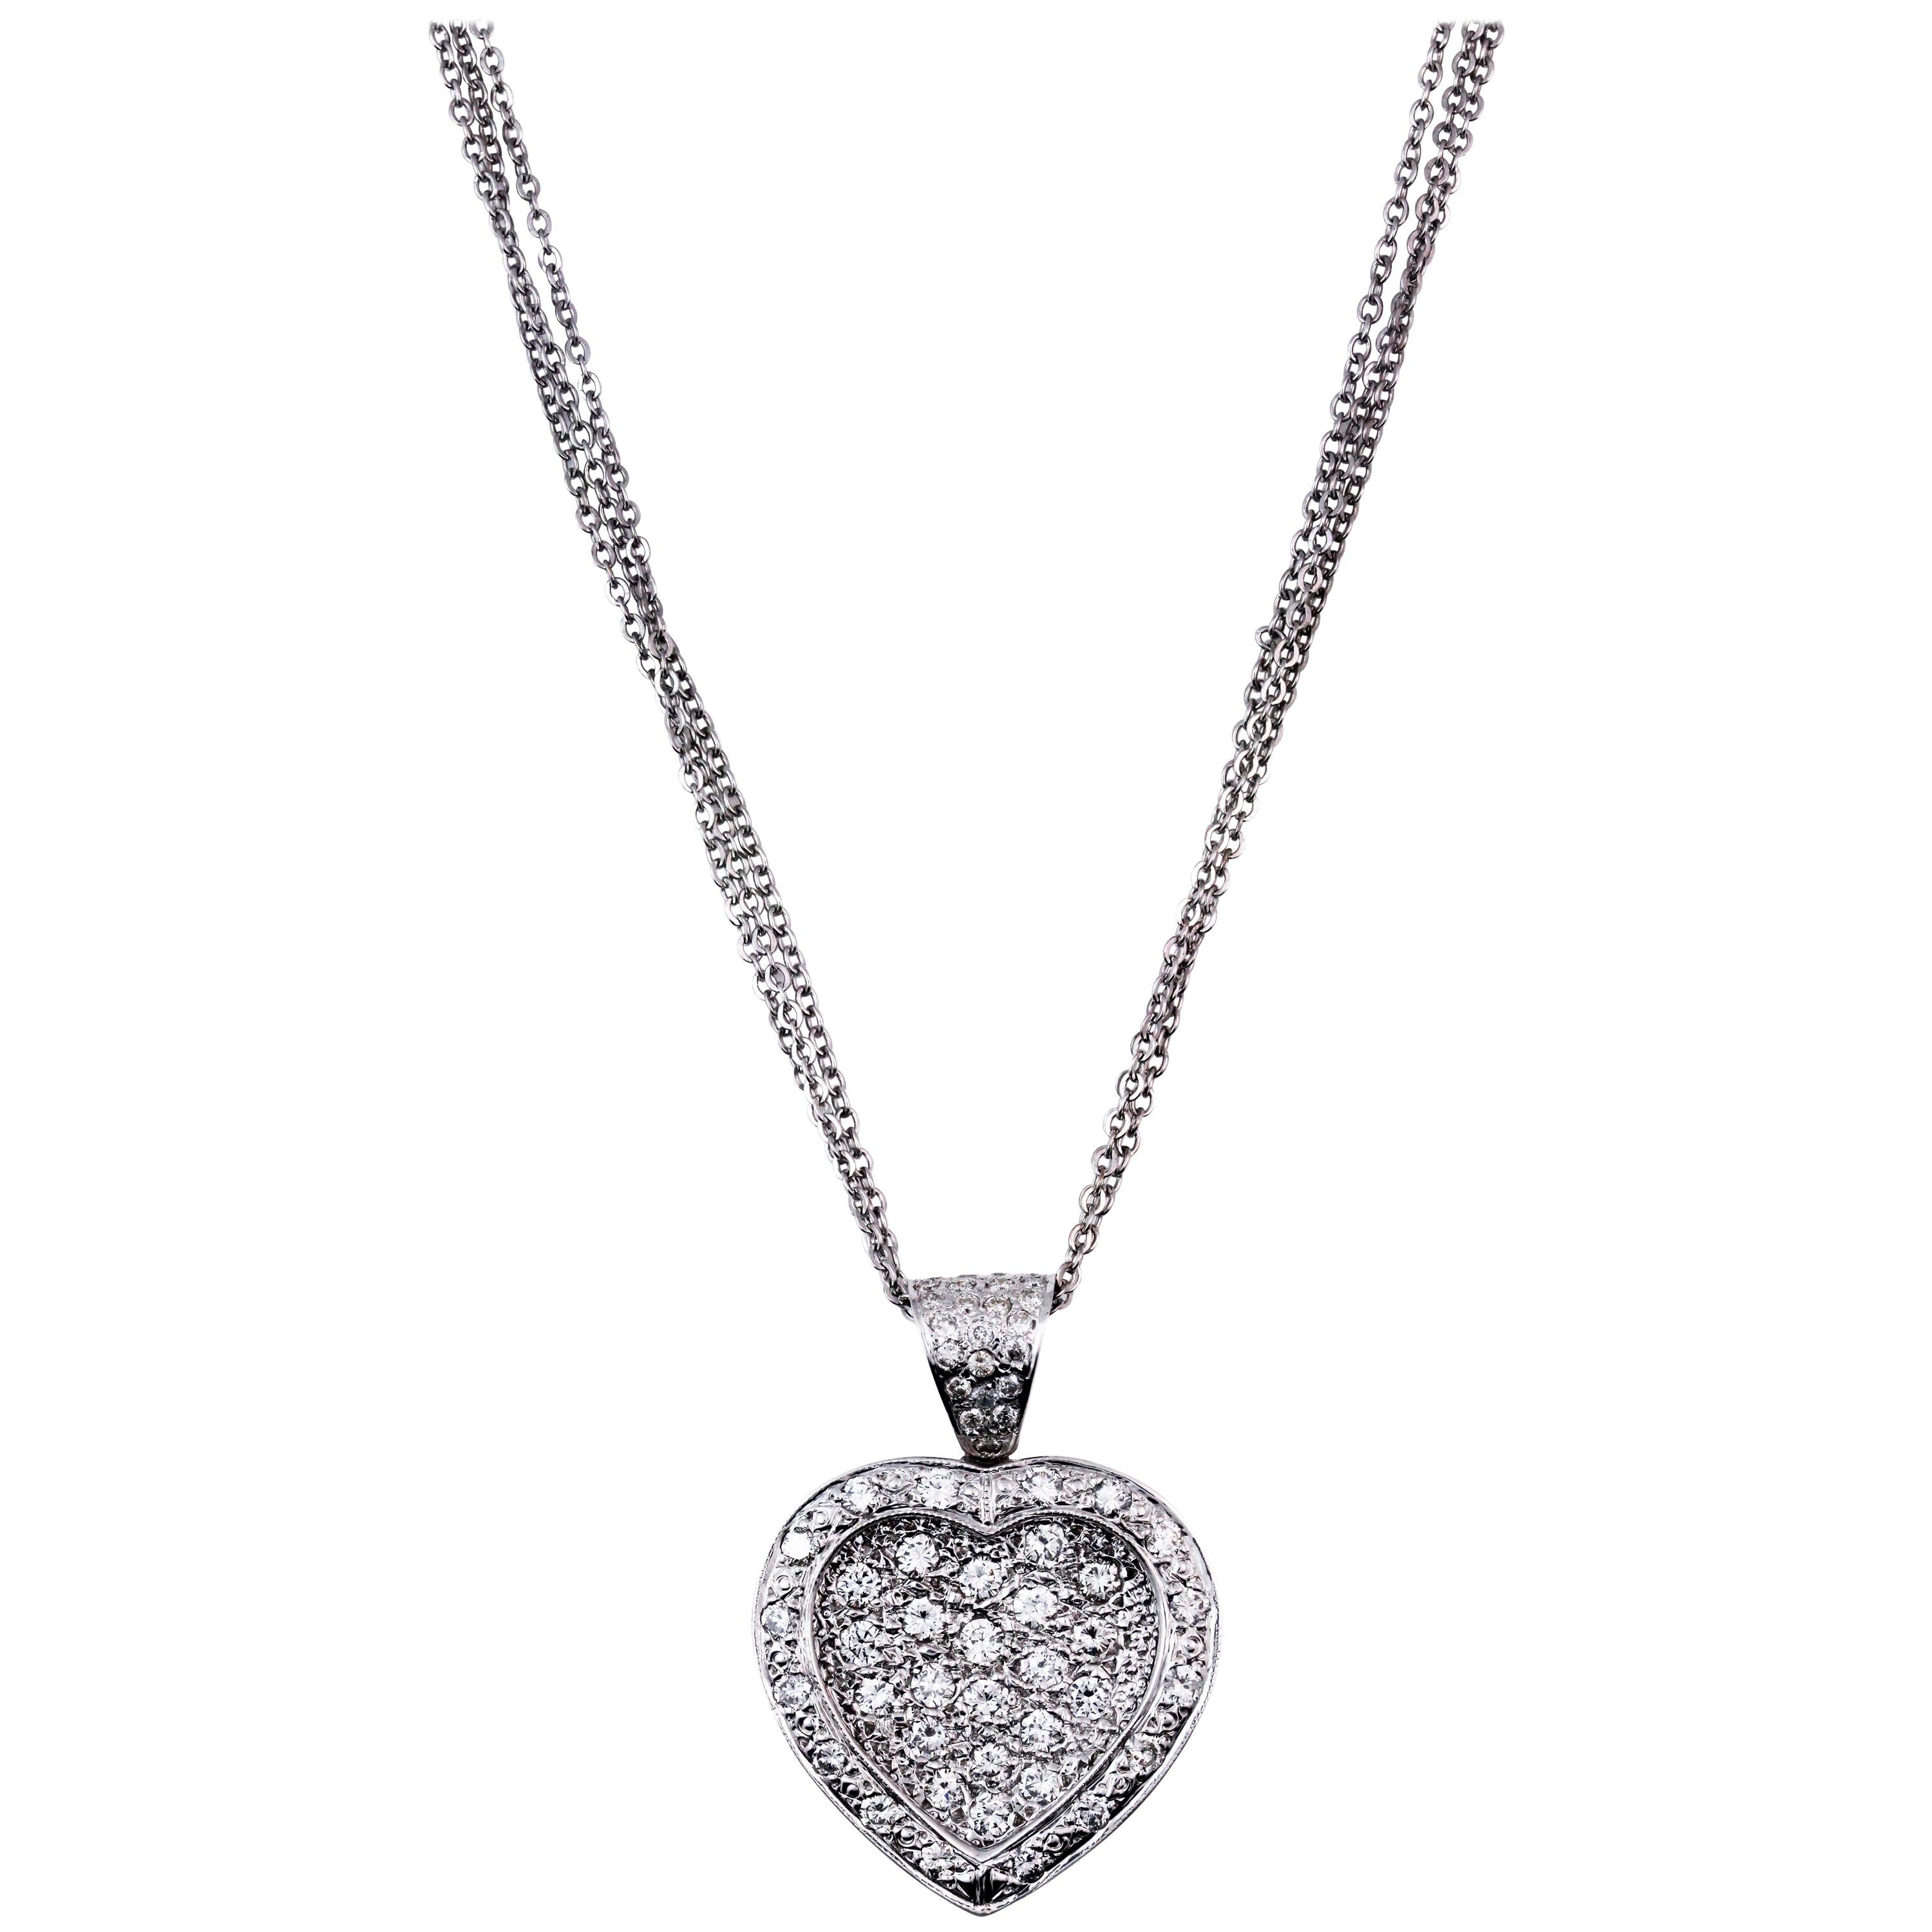 White Gold and Diamond Heart Pendant with Triple-Link Chain